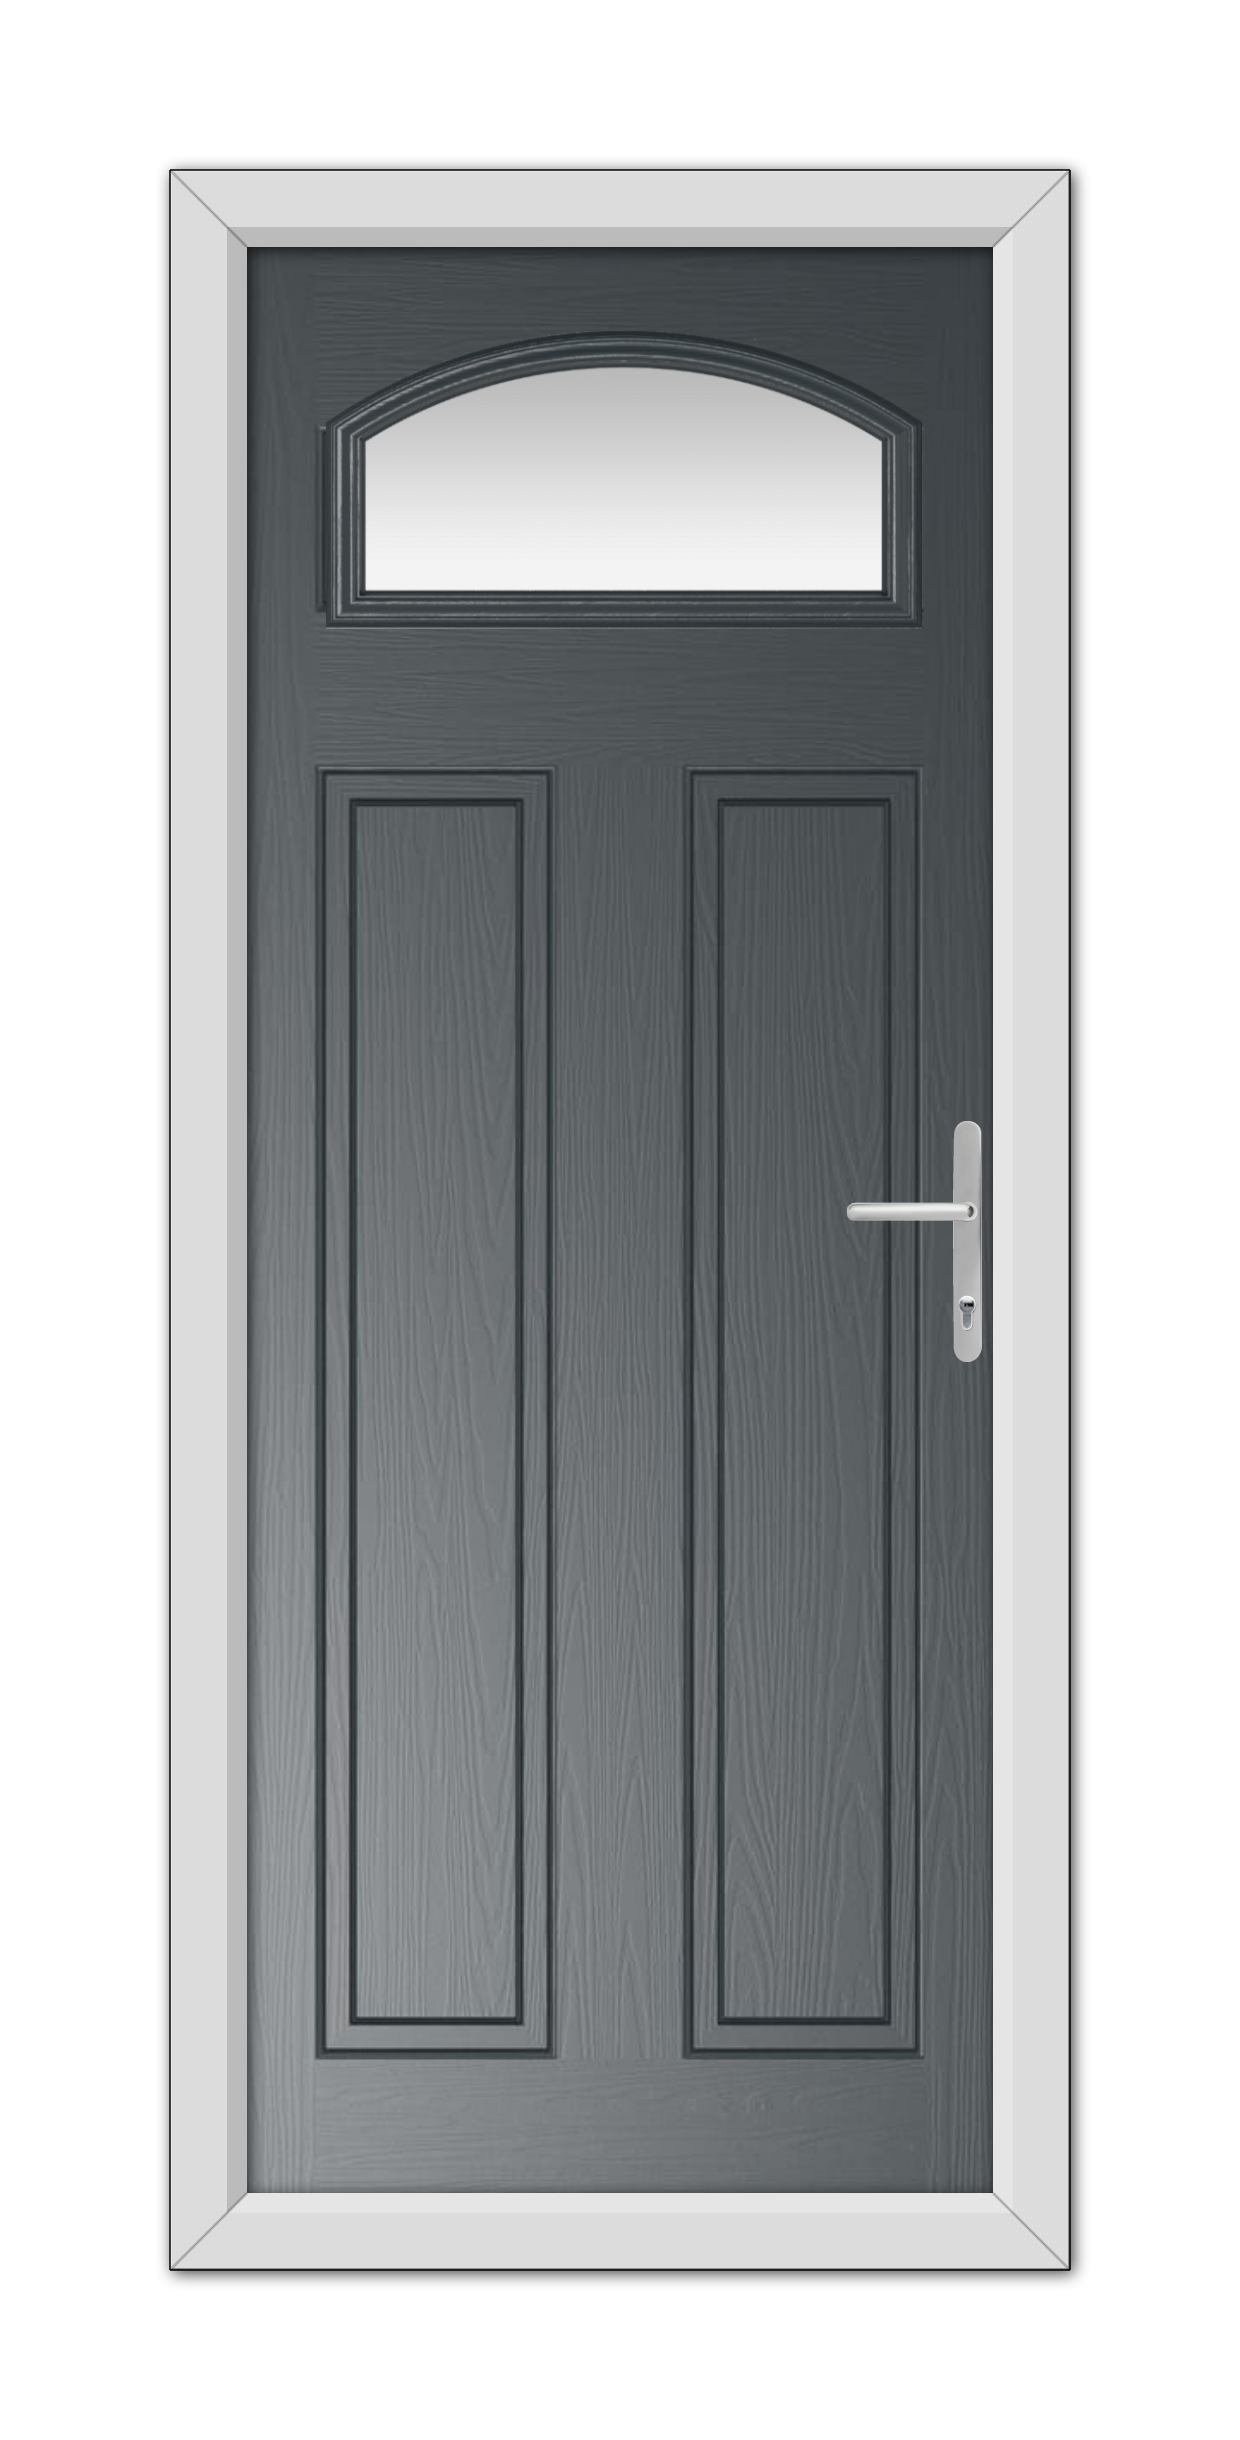 Anthracite Grey Harlington Composite Door 48mm Timber Core with an arched window and white frame, featuring a metallic handle on the right side.